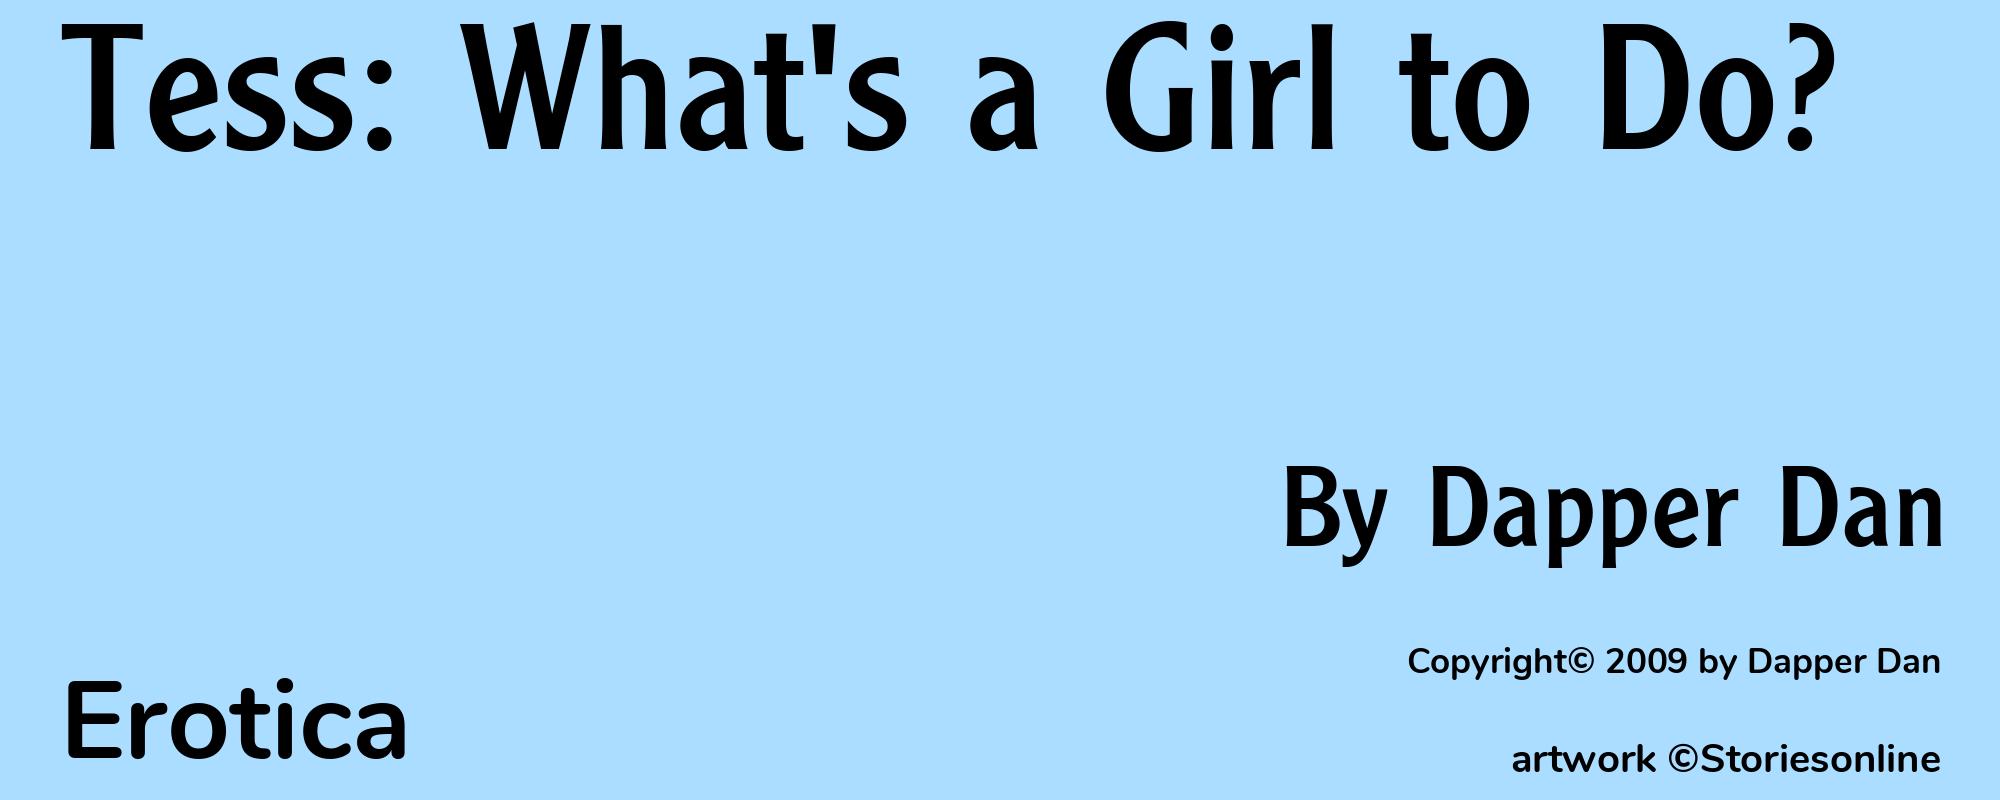 Tess: What's a Girl to Do? - Cover